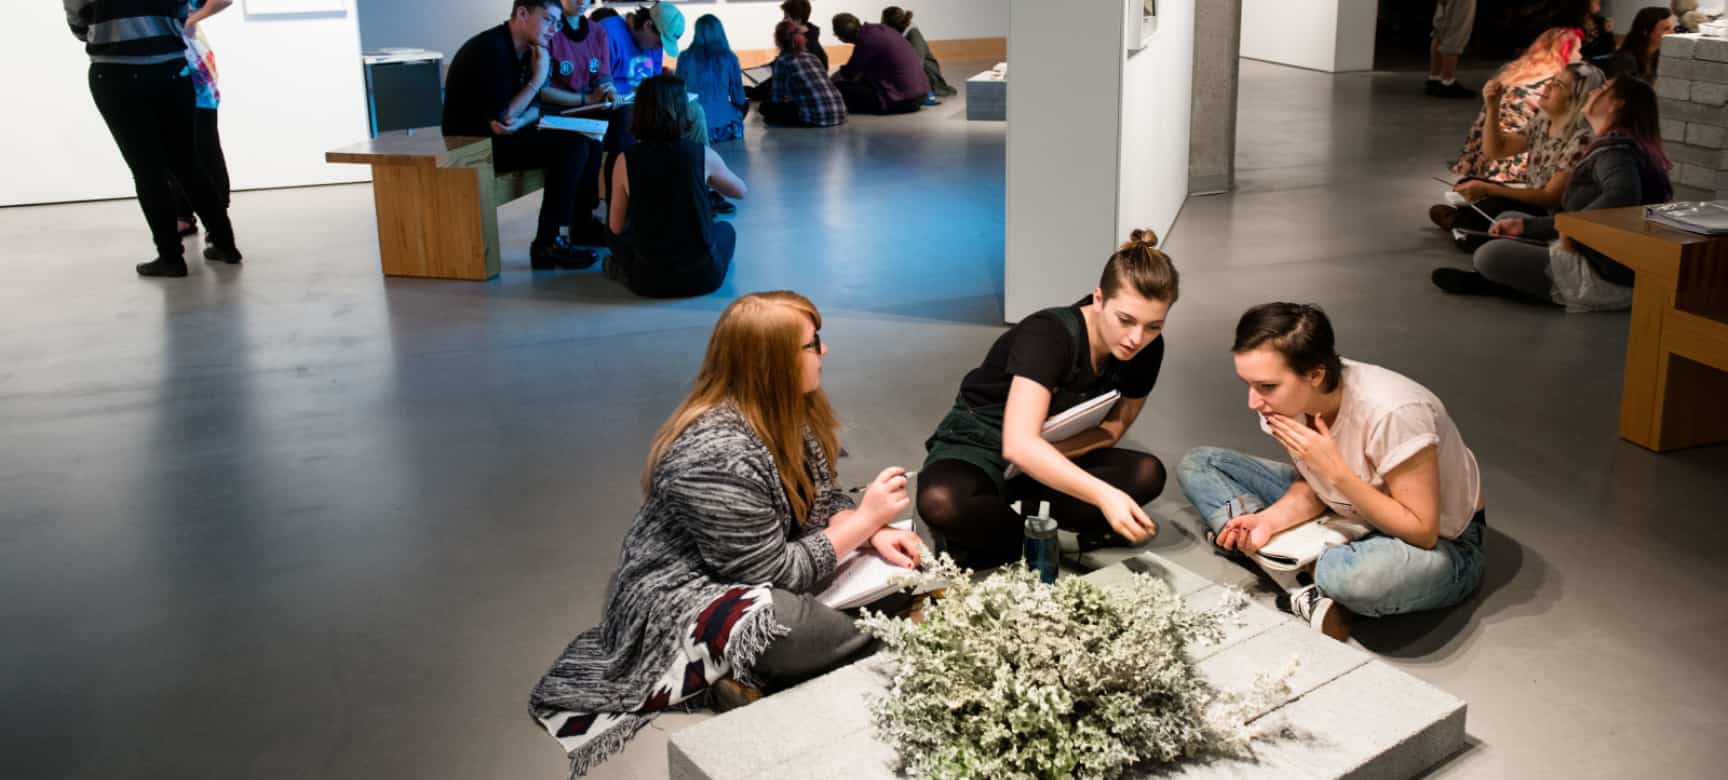 Three female students with notebooks sit close to a piece of artwork made of wood and flowers on the floor, holding a discussion, inside an art gallery. Other students are visible in the background doing the same.